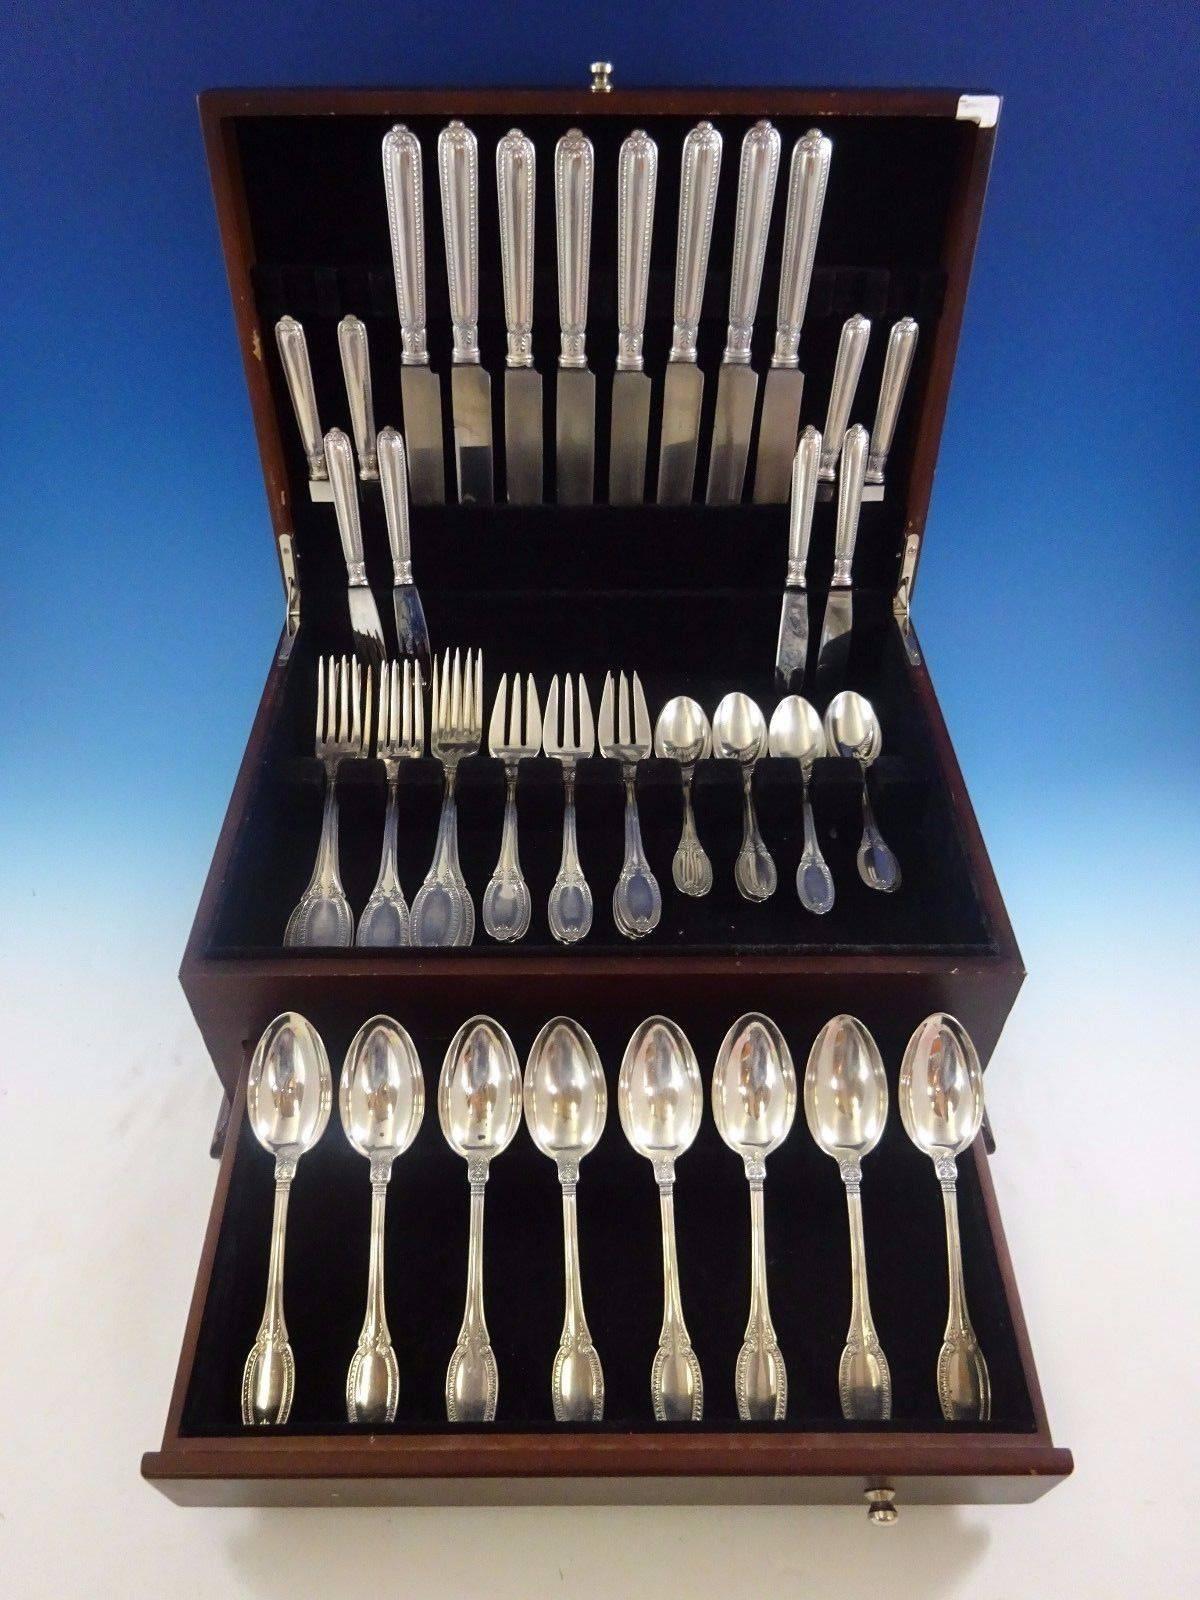 Empire by Buccellati sterling silver flatware set of 48 pieces. This set includes: 4 Dinner knives, 9 7/8", 4 Dinner Knives, 10", 8 Dinner Forks, 8 3/8", 8 Salad / Fish Forks, 3-tine, 7", 8 Teaspoons, 6", 8 Place Soup